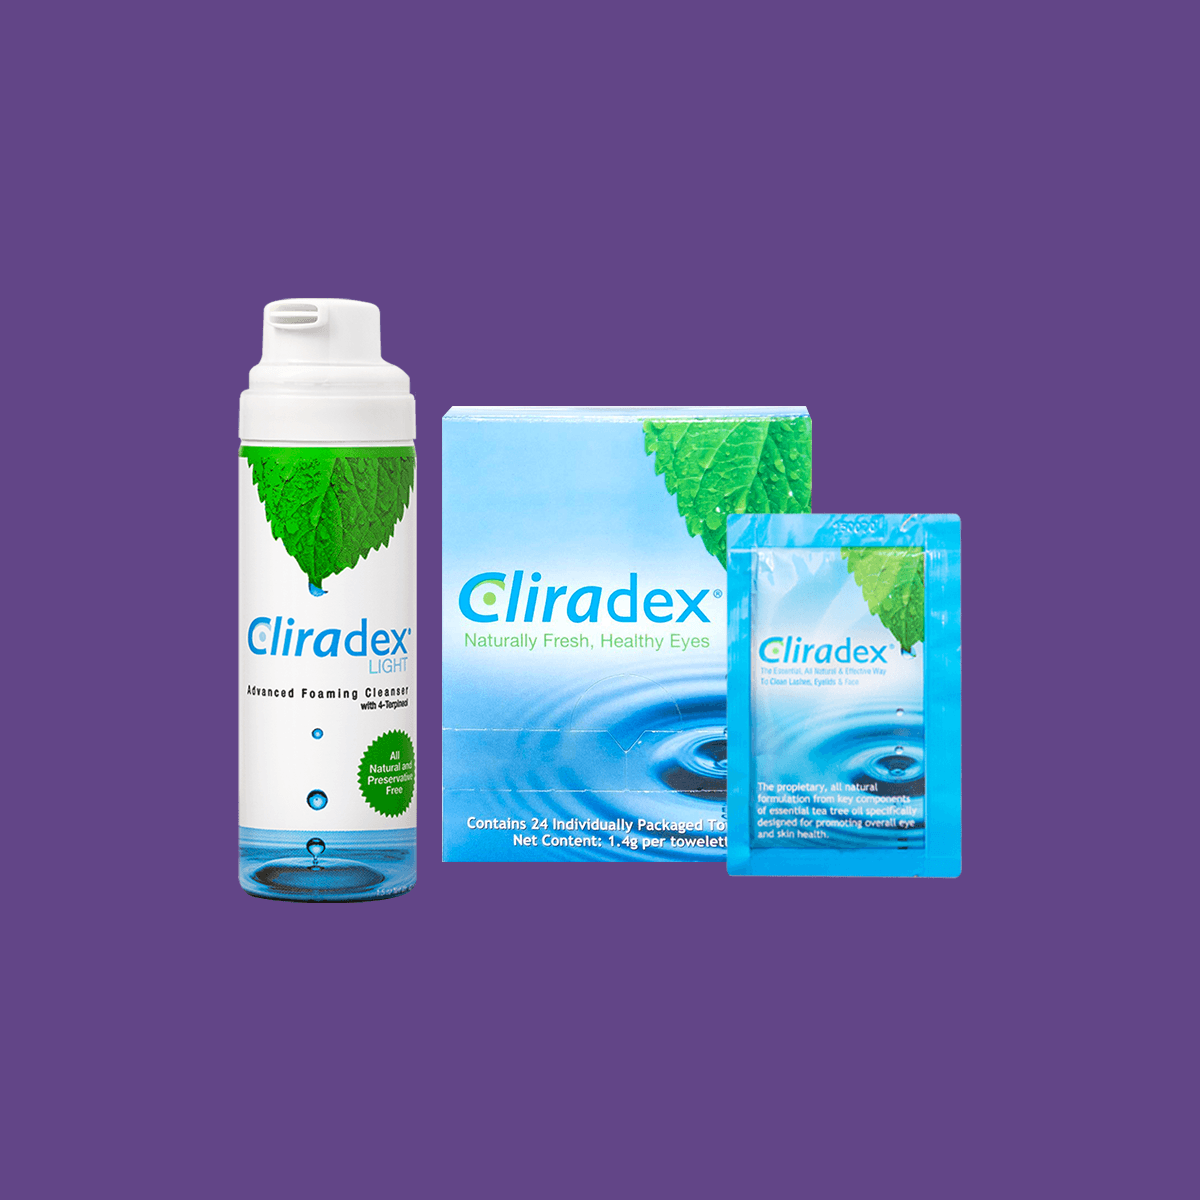 Cliradex Complete Kit (24 wipes and 2 Foam Cans) - DryEye Rescue Store